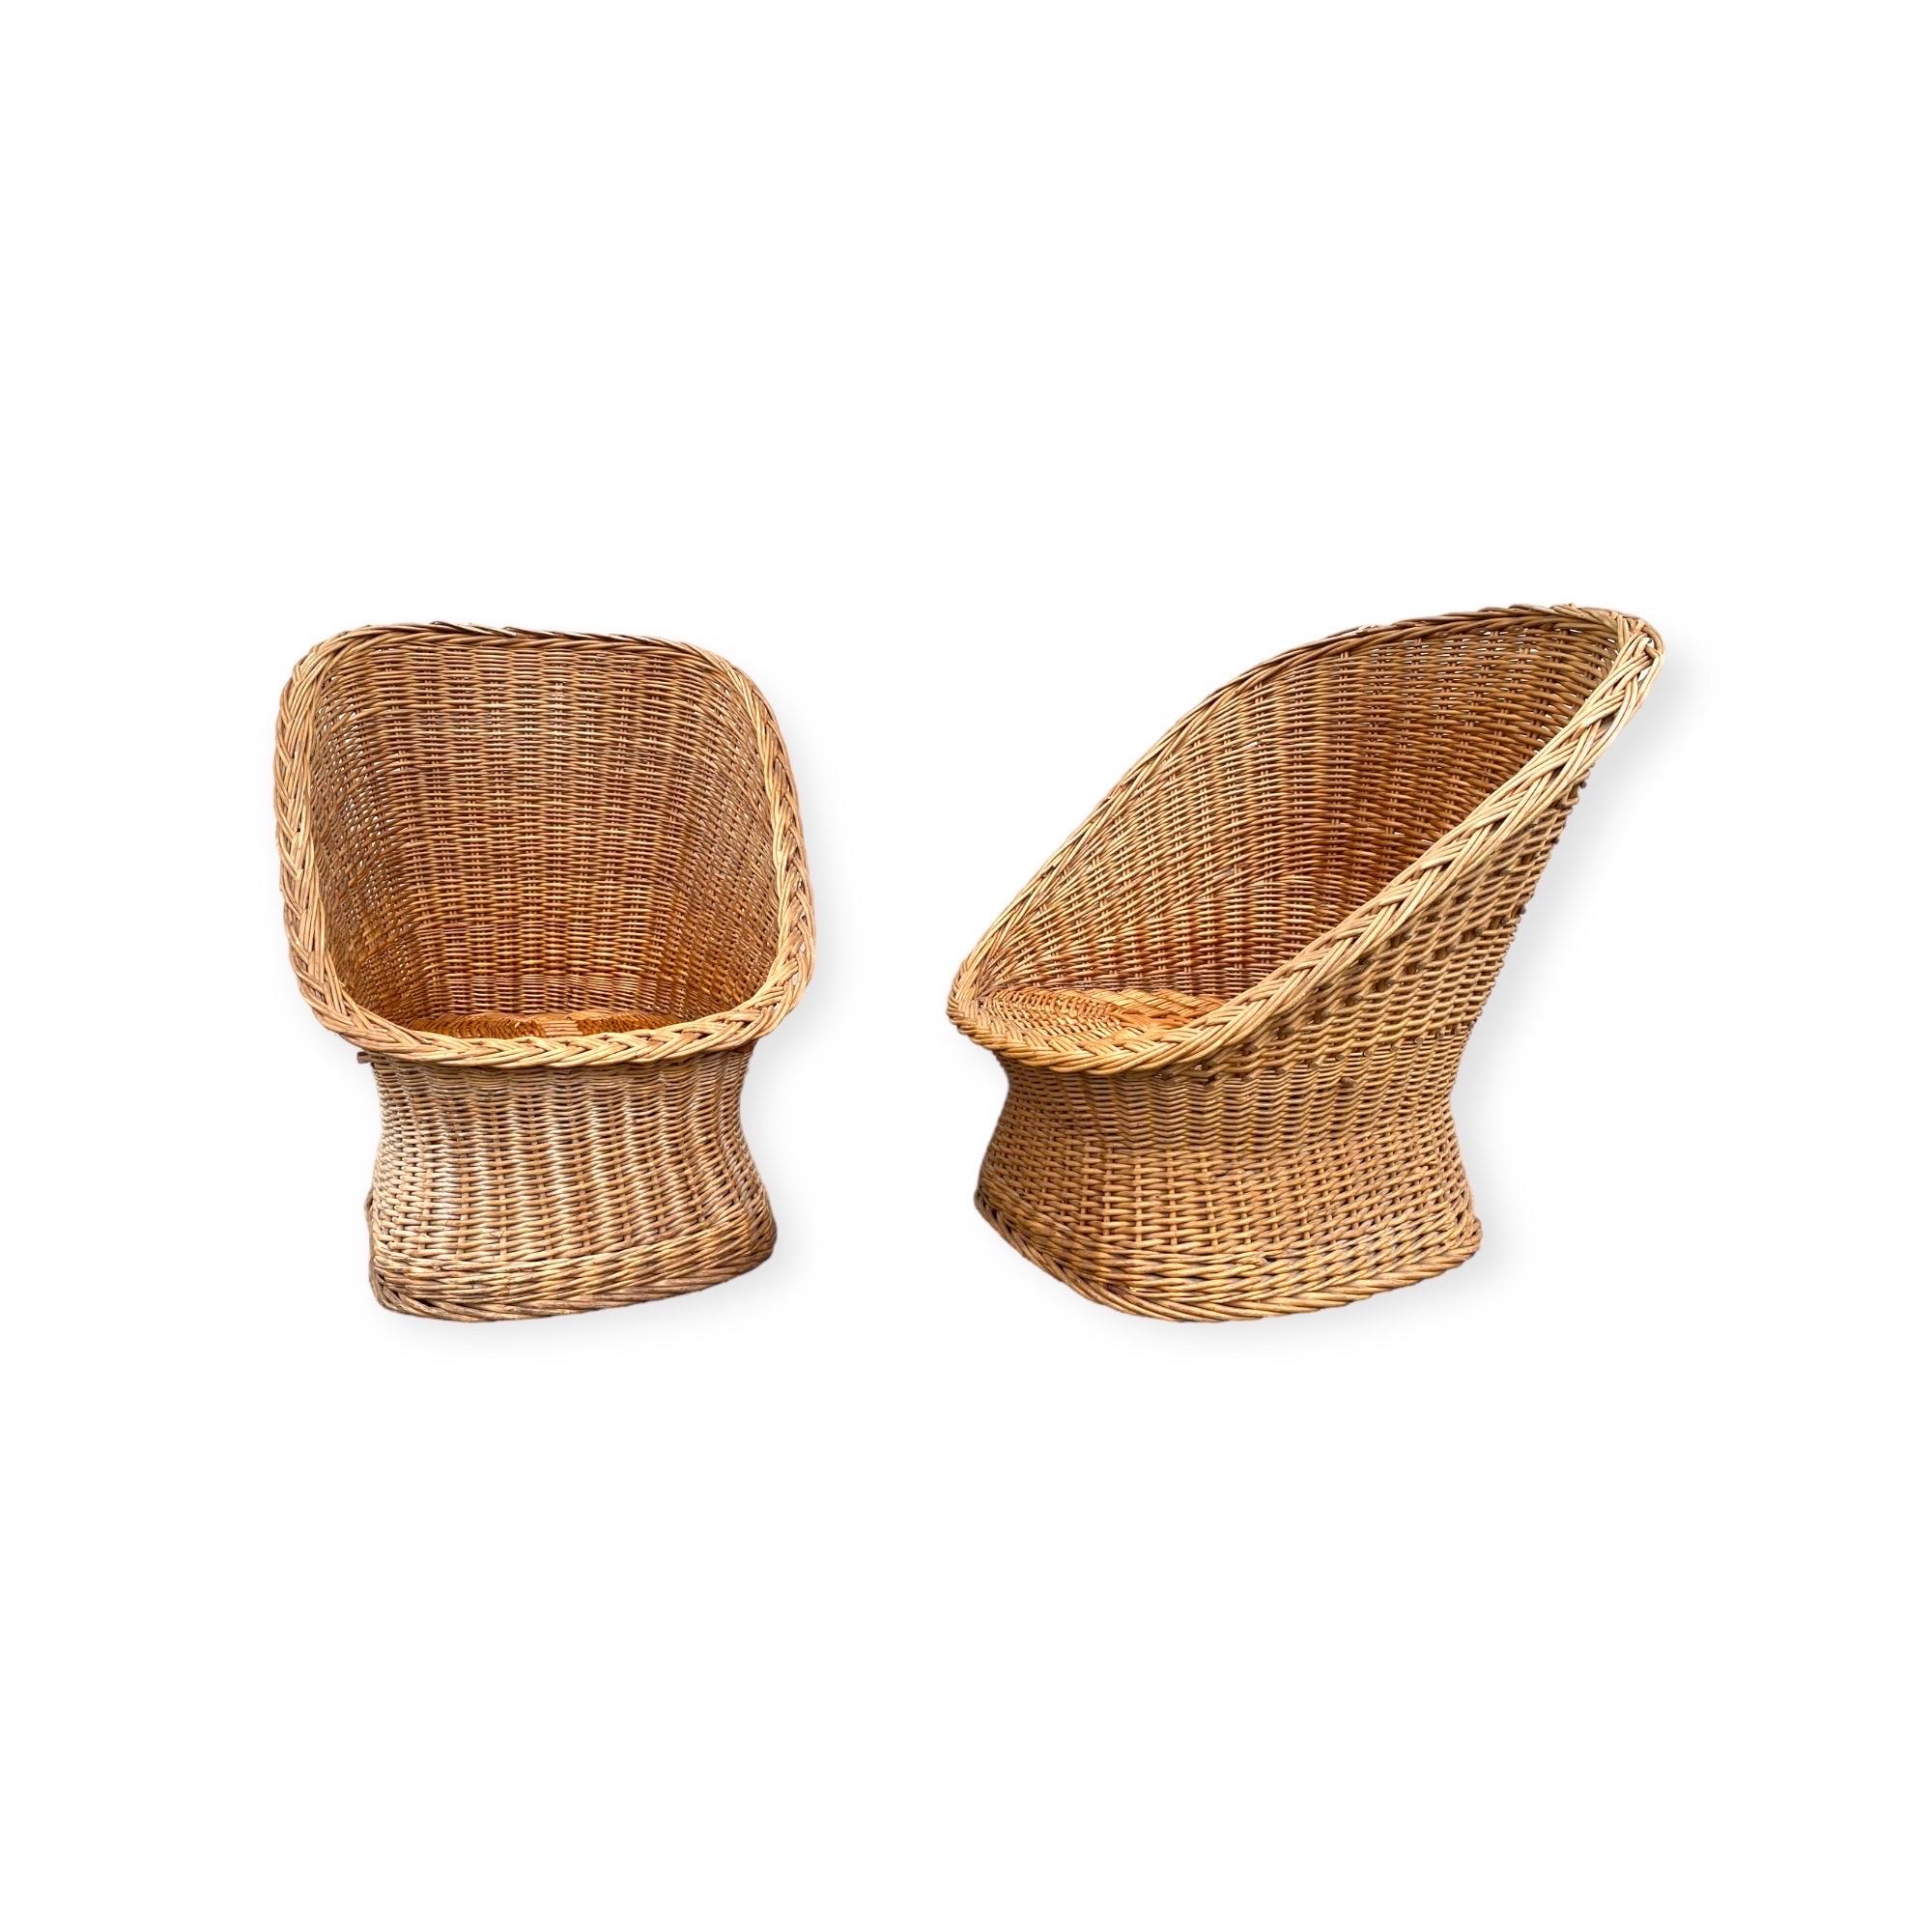 Excellent stylish pair of woven Rattan or Wicker chairs. The hourglass shape makes this pair an irresistible his and hers set with one chair slightly bigger than the other. Cushions or seat pads are not included. This allows you to choose the seat